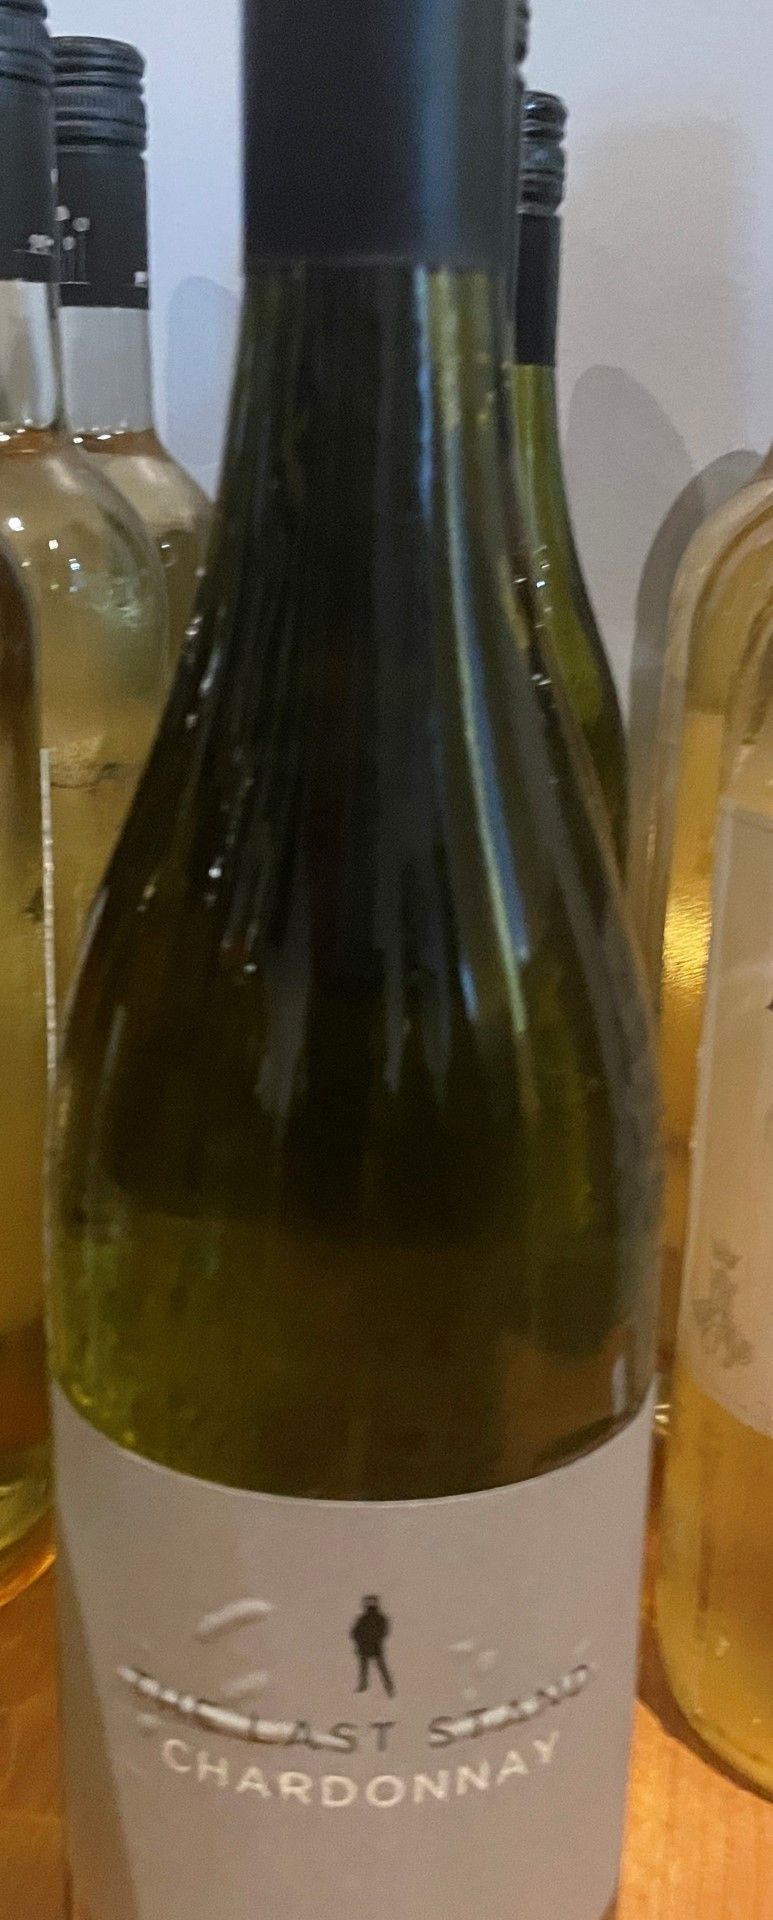 4 x Bottles The Last Stand Chardonnay - New / Unopened - Ref: JMR153 - CL782 - Location: - Image 3 of 3